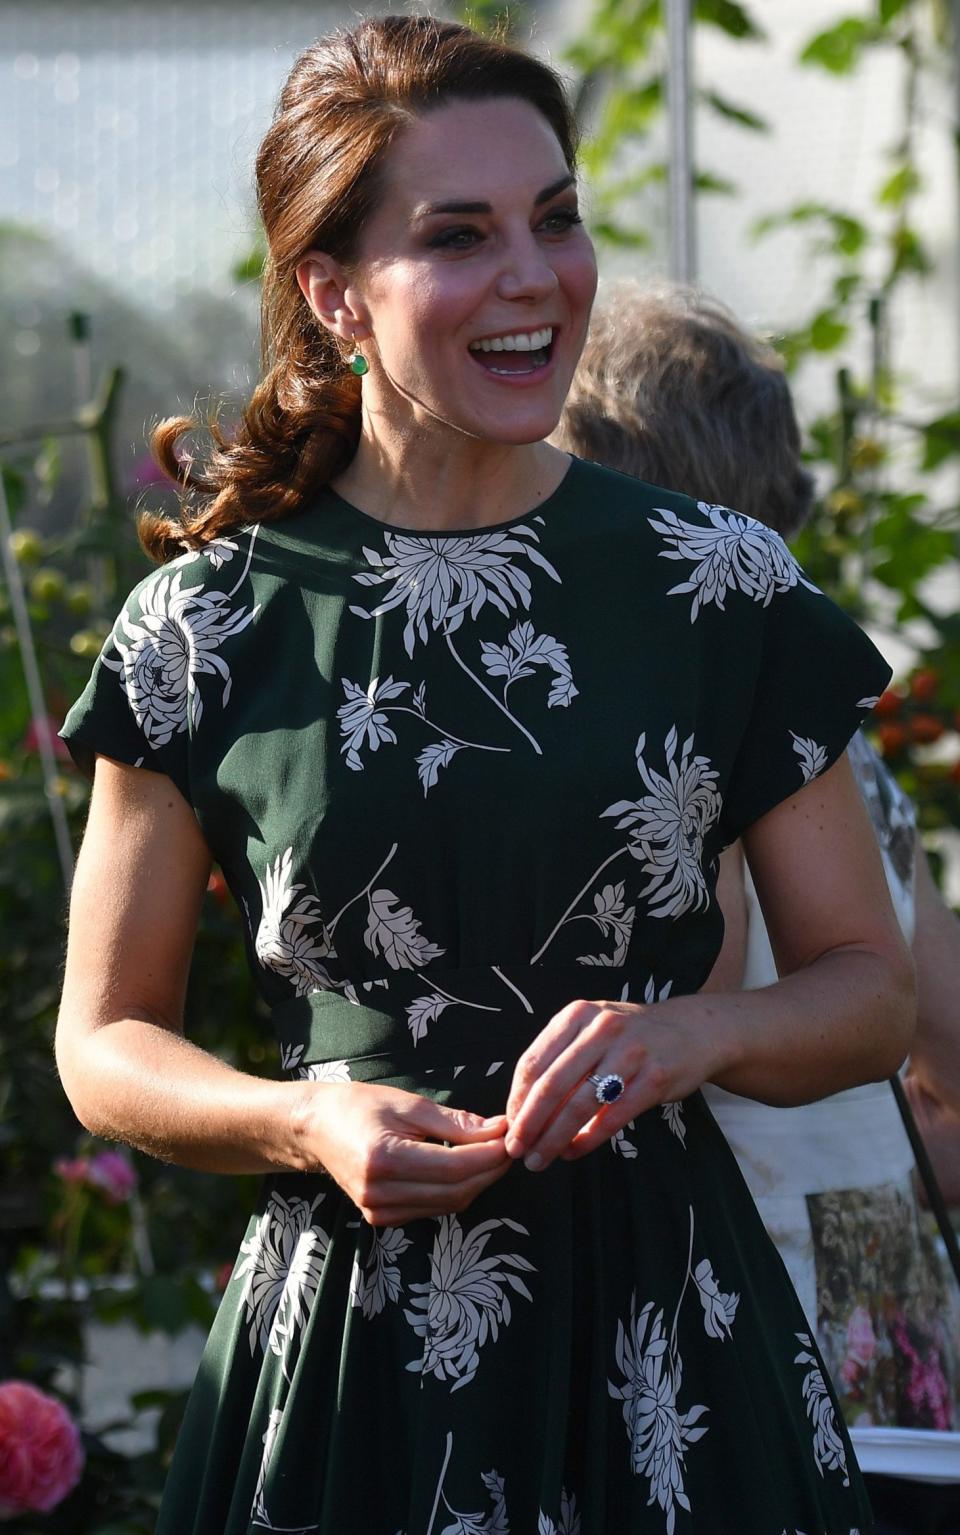 The Duchess of Cambridge tries a tomato in Chris Evans Taste Garden at the RHS Chelsea Flower Show - Credit: WPA Pool